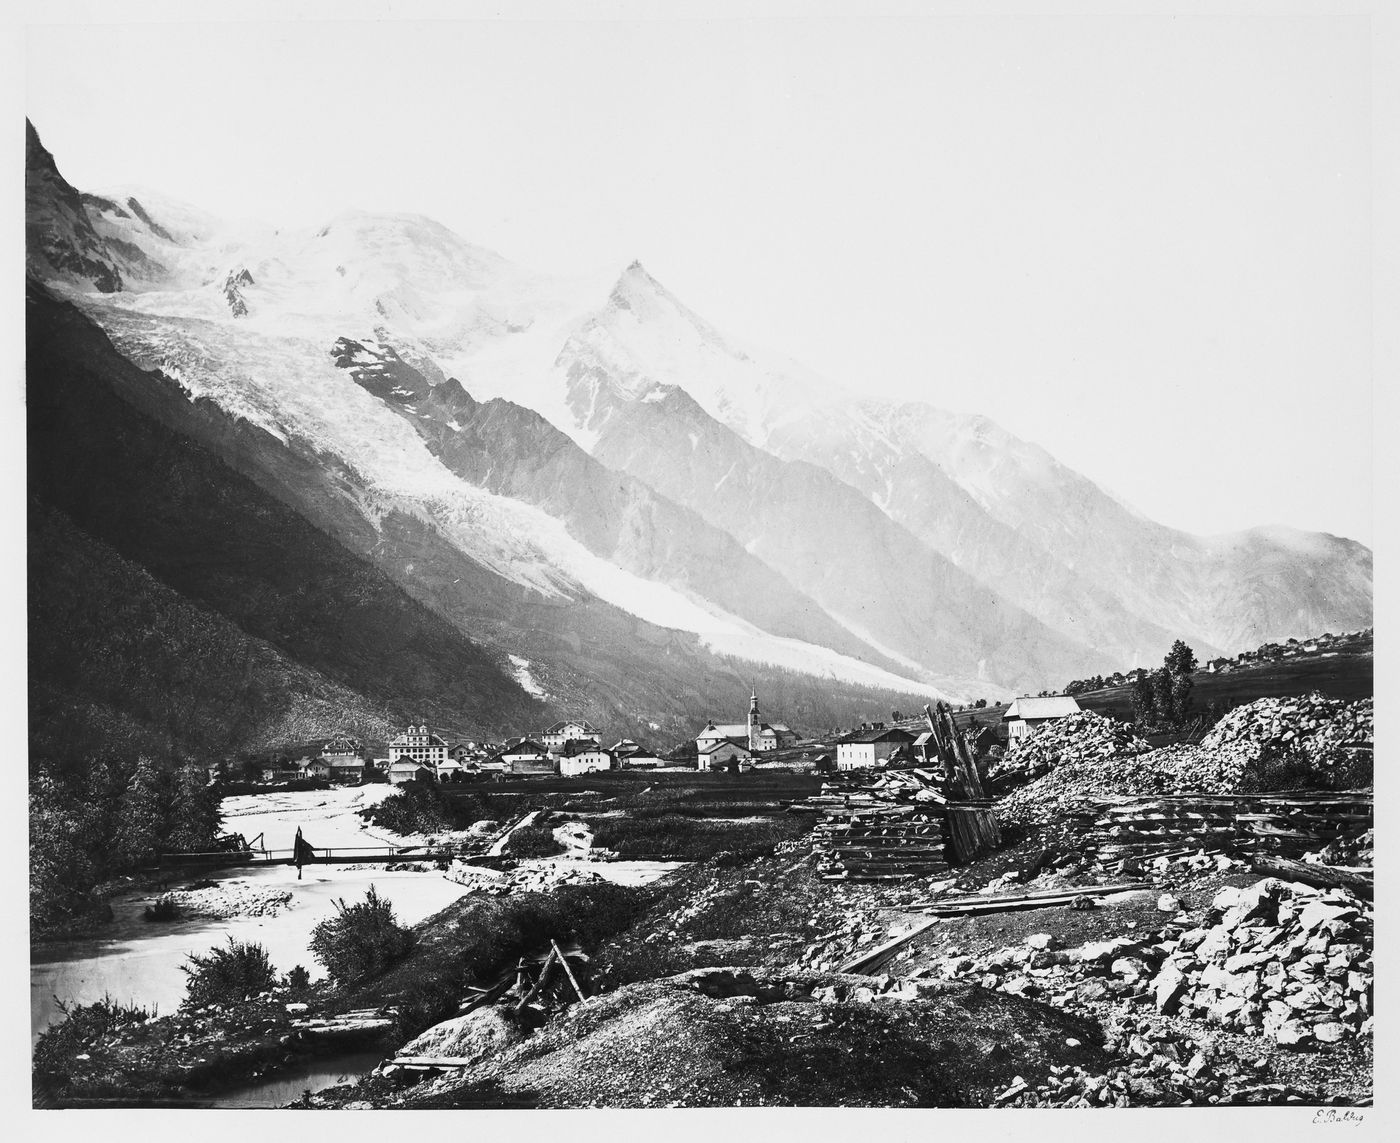 View of a village in a valley with mountains and glacier in the background, France